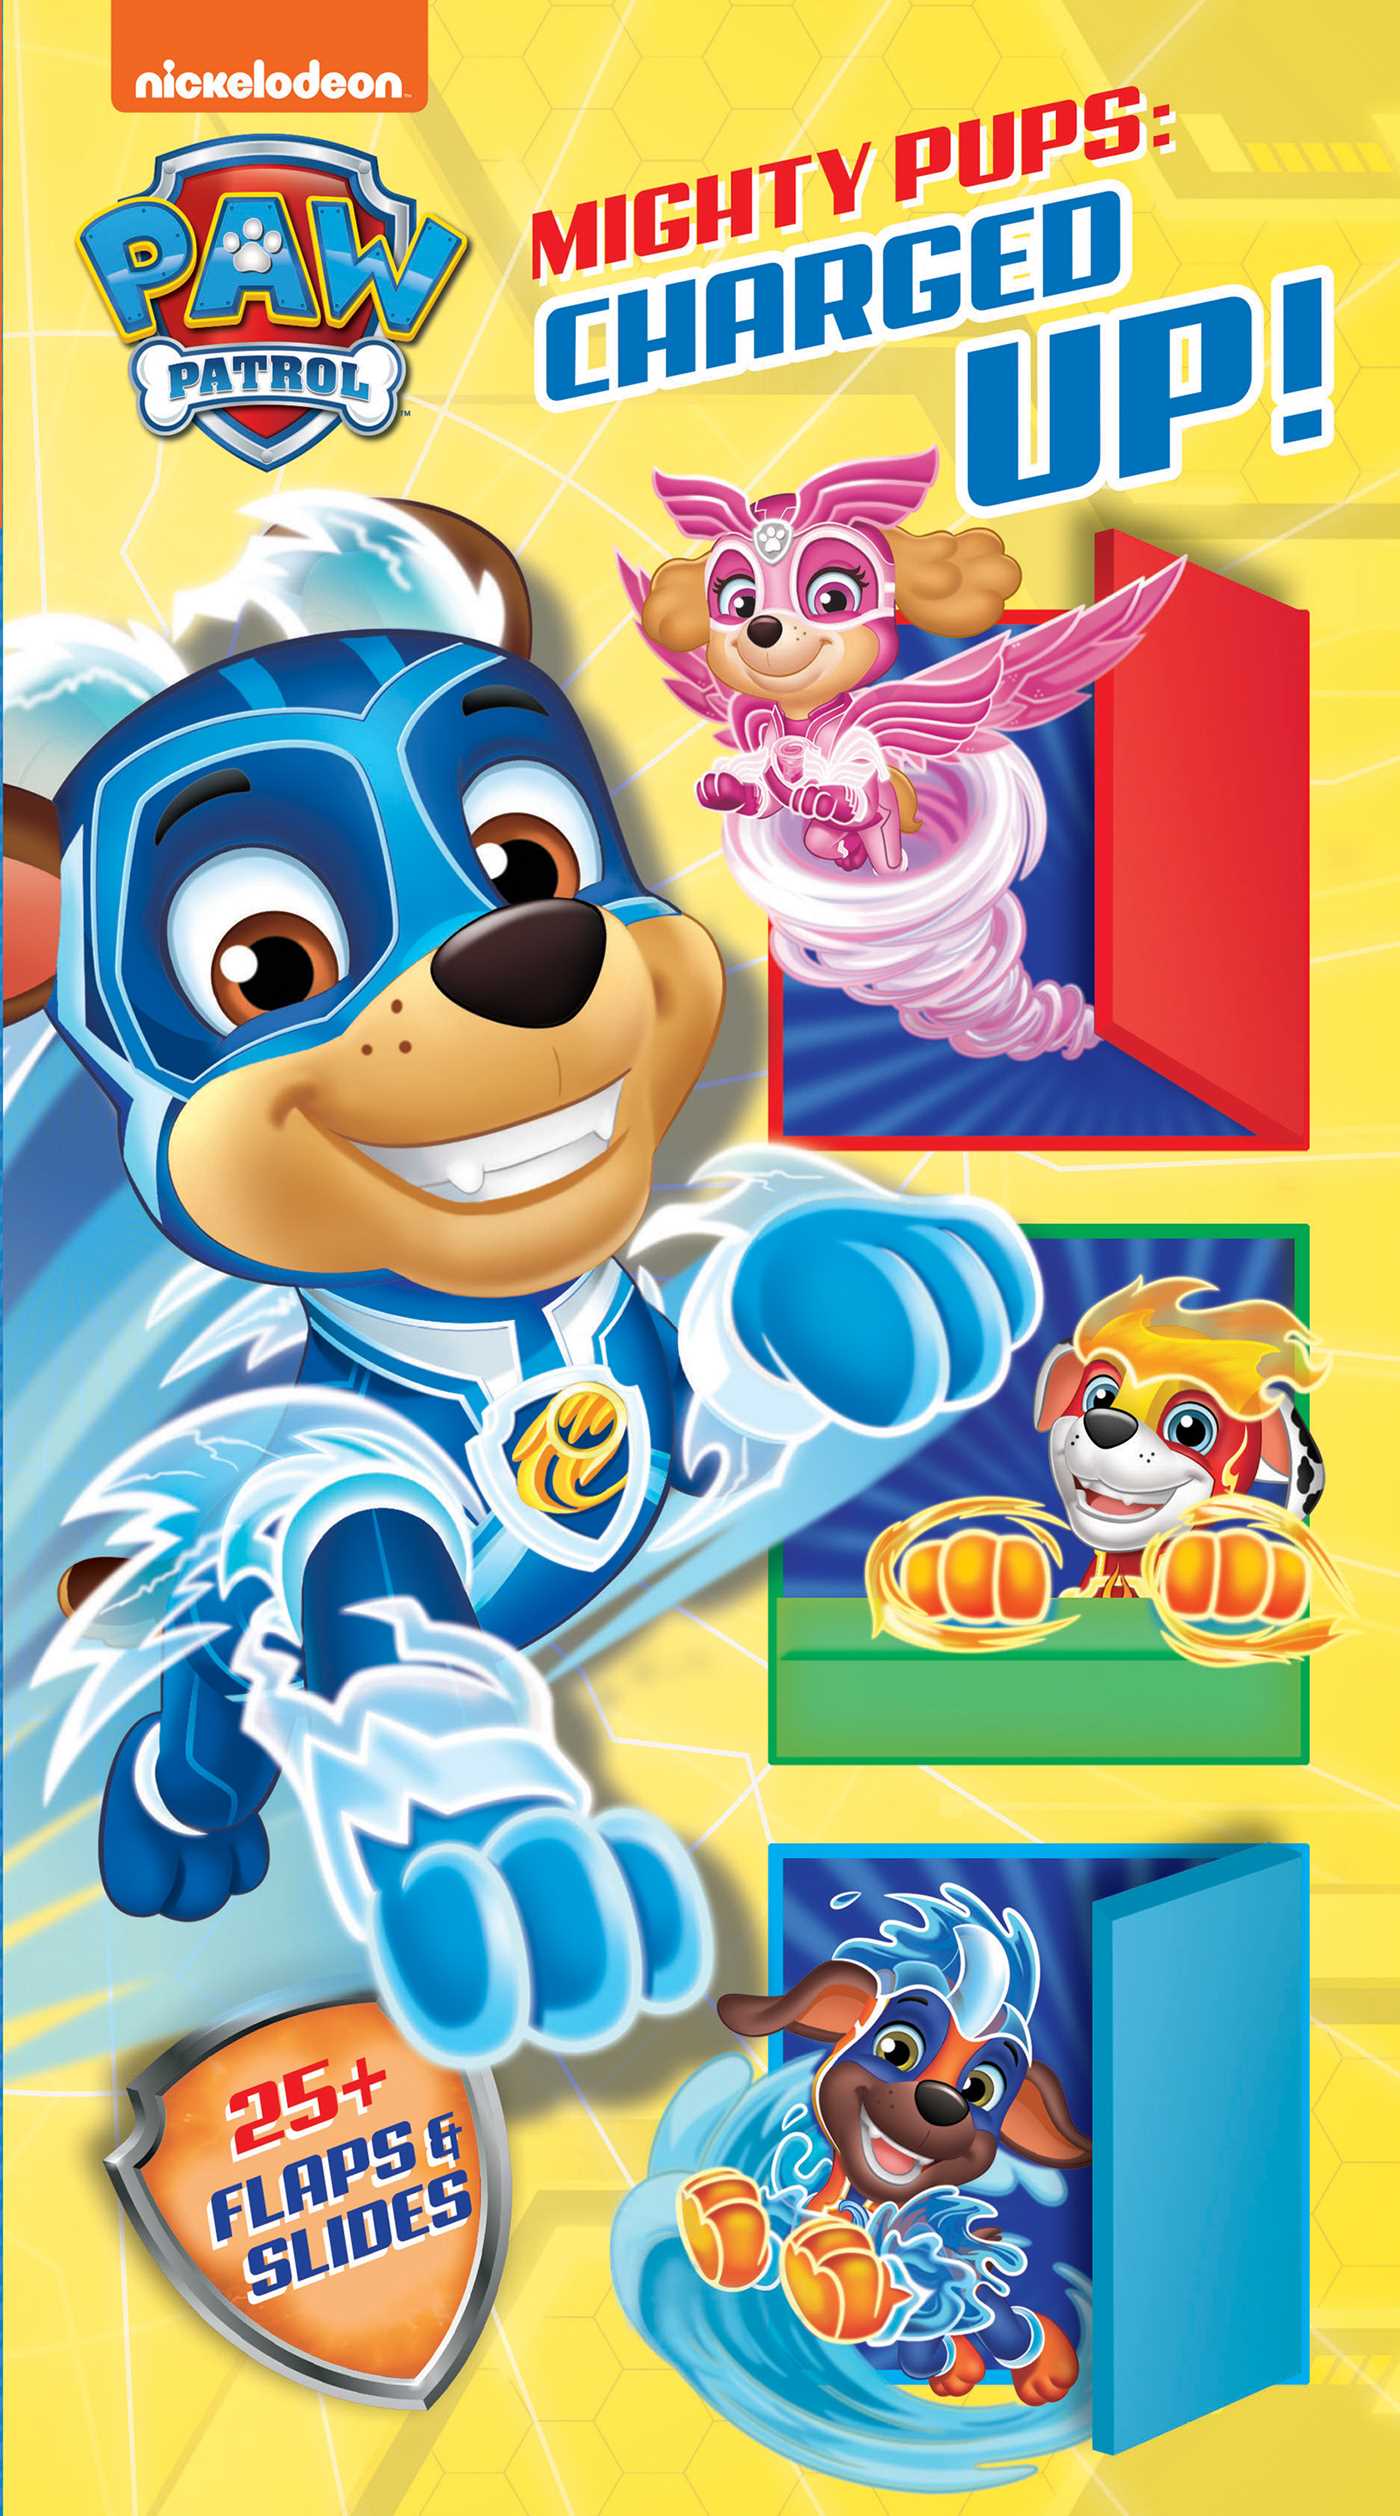 Nickelodeon PAW Patrol Mighty Pups: Charged Up!